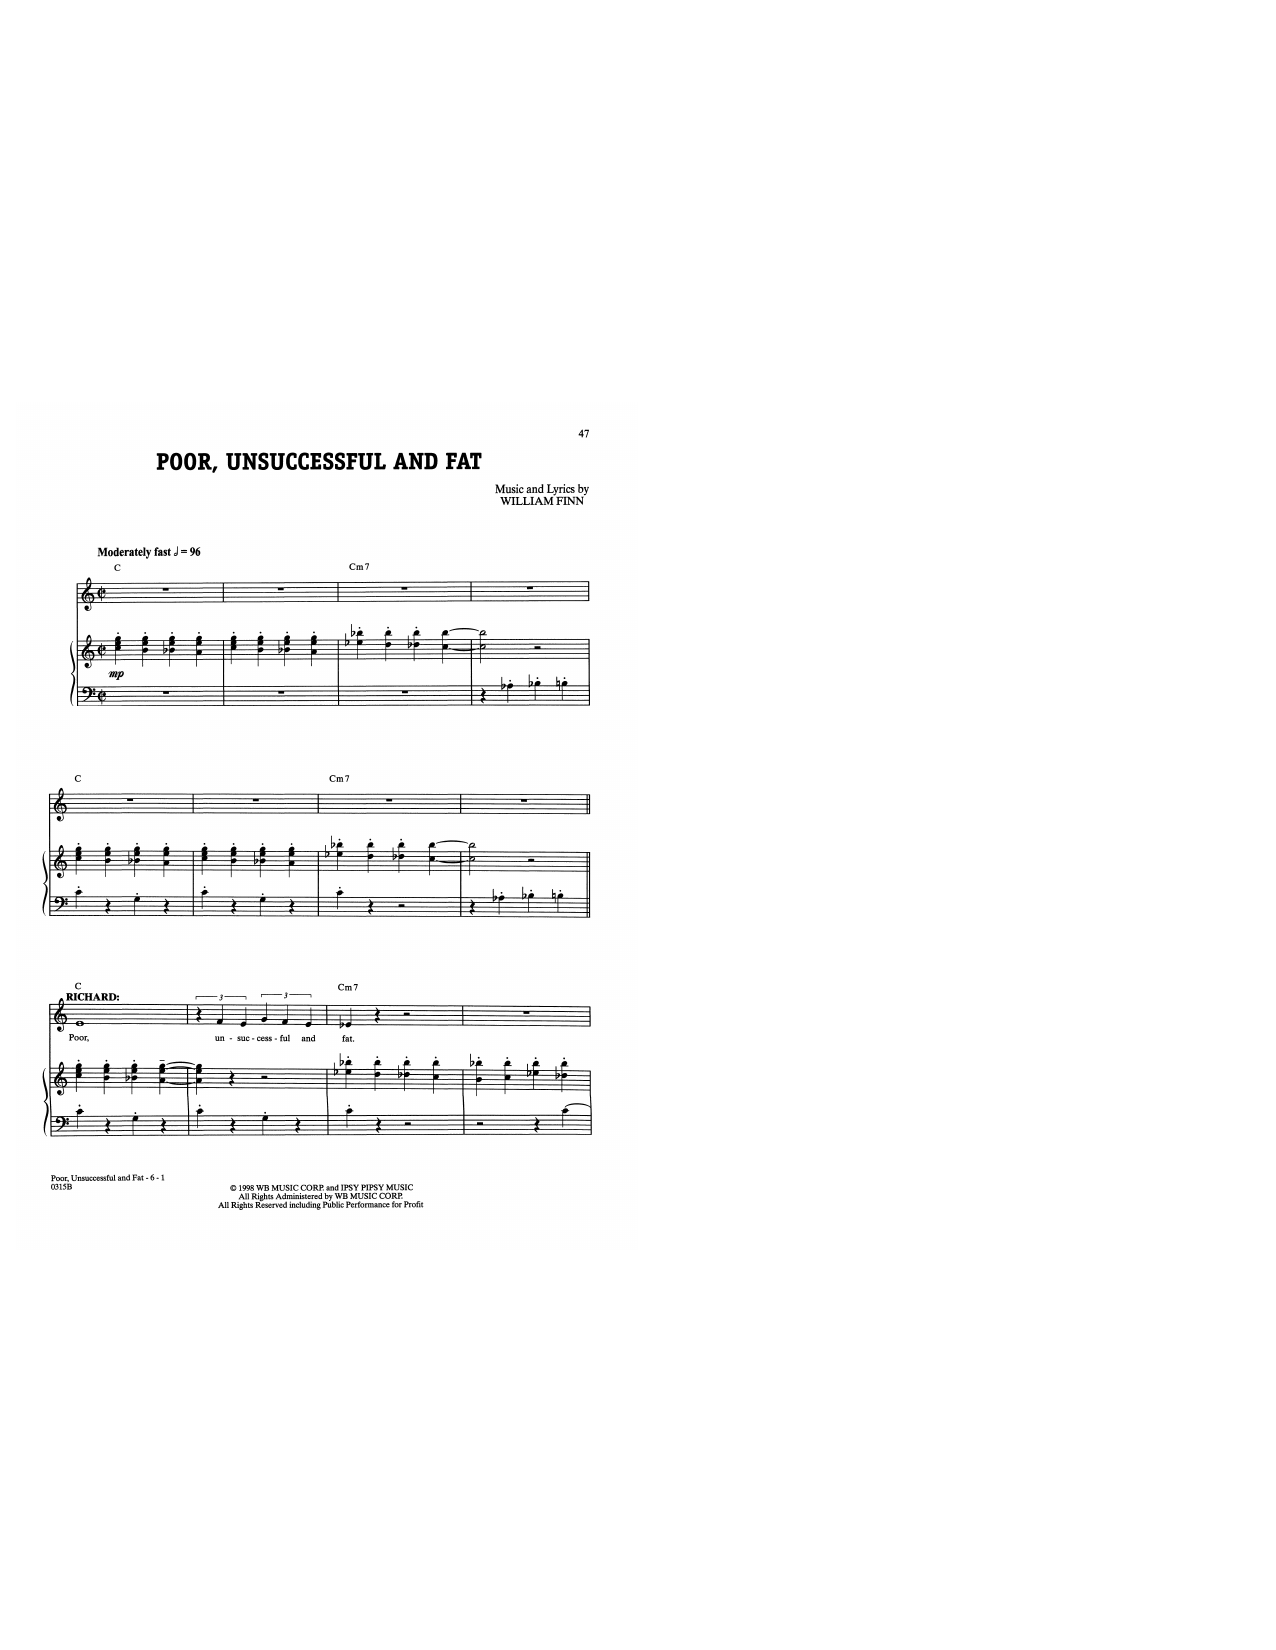 Download William Finn Poor, Unsuccessful, And Fat (from A New Sheet Music